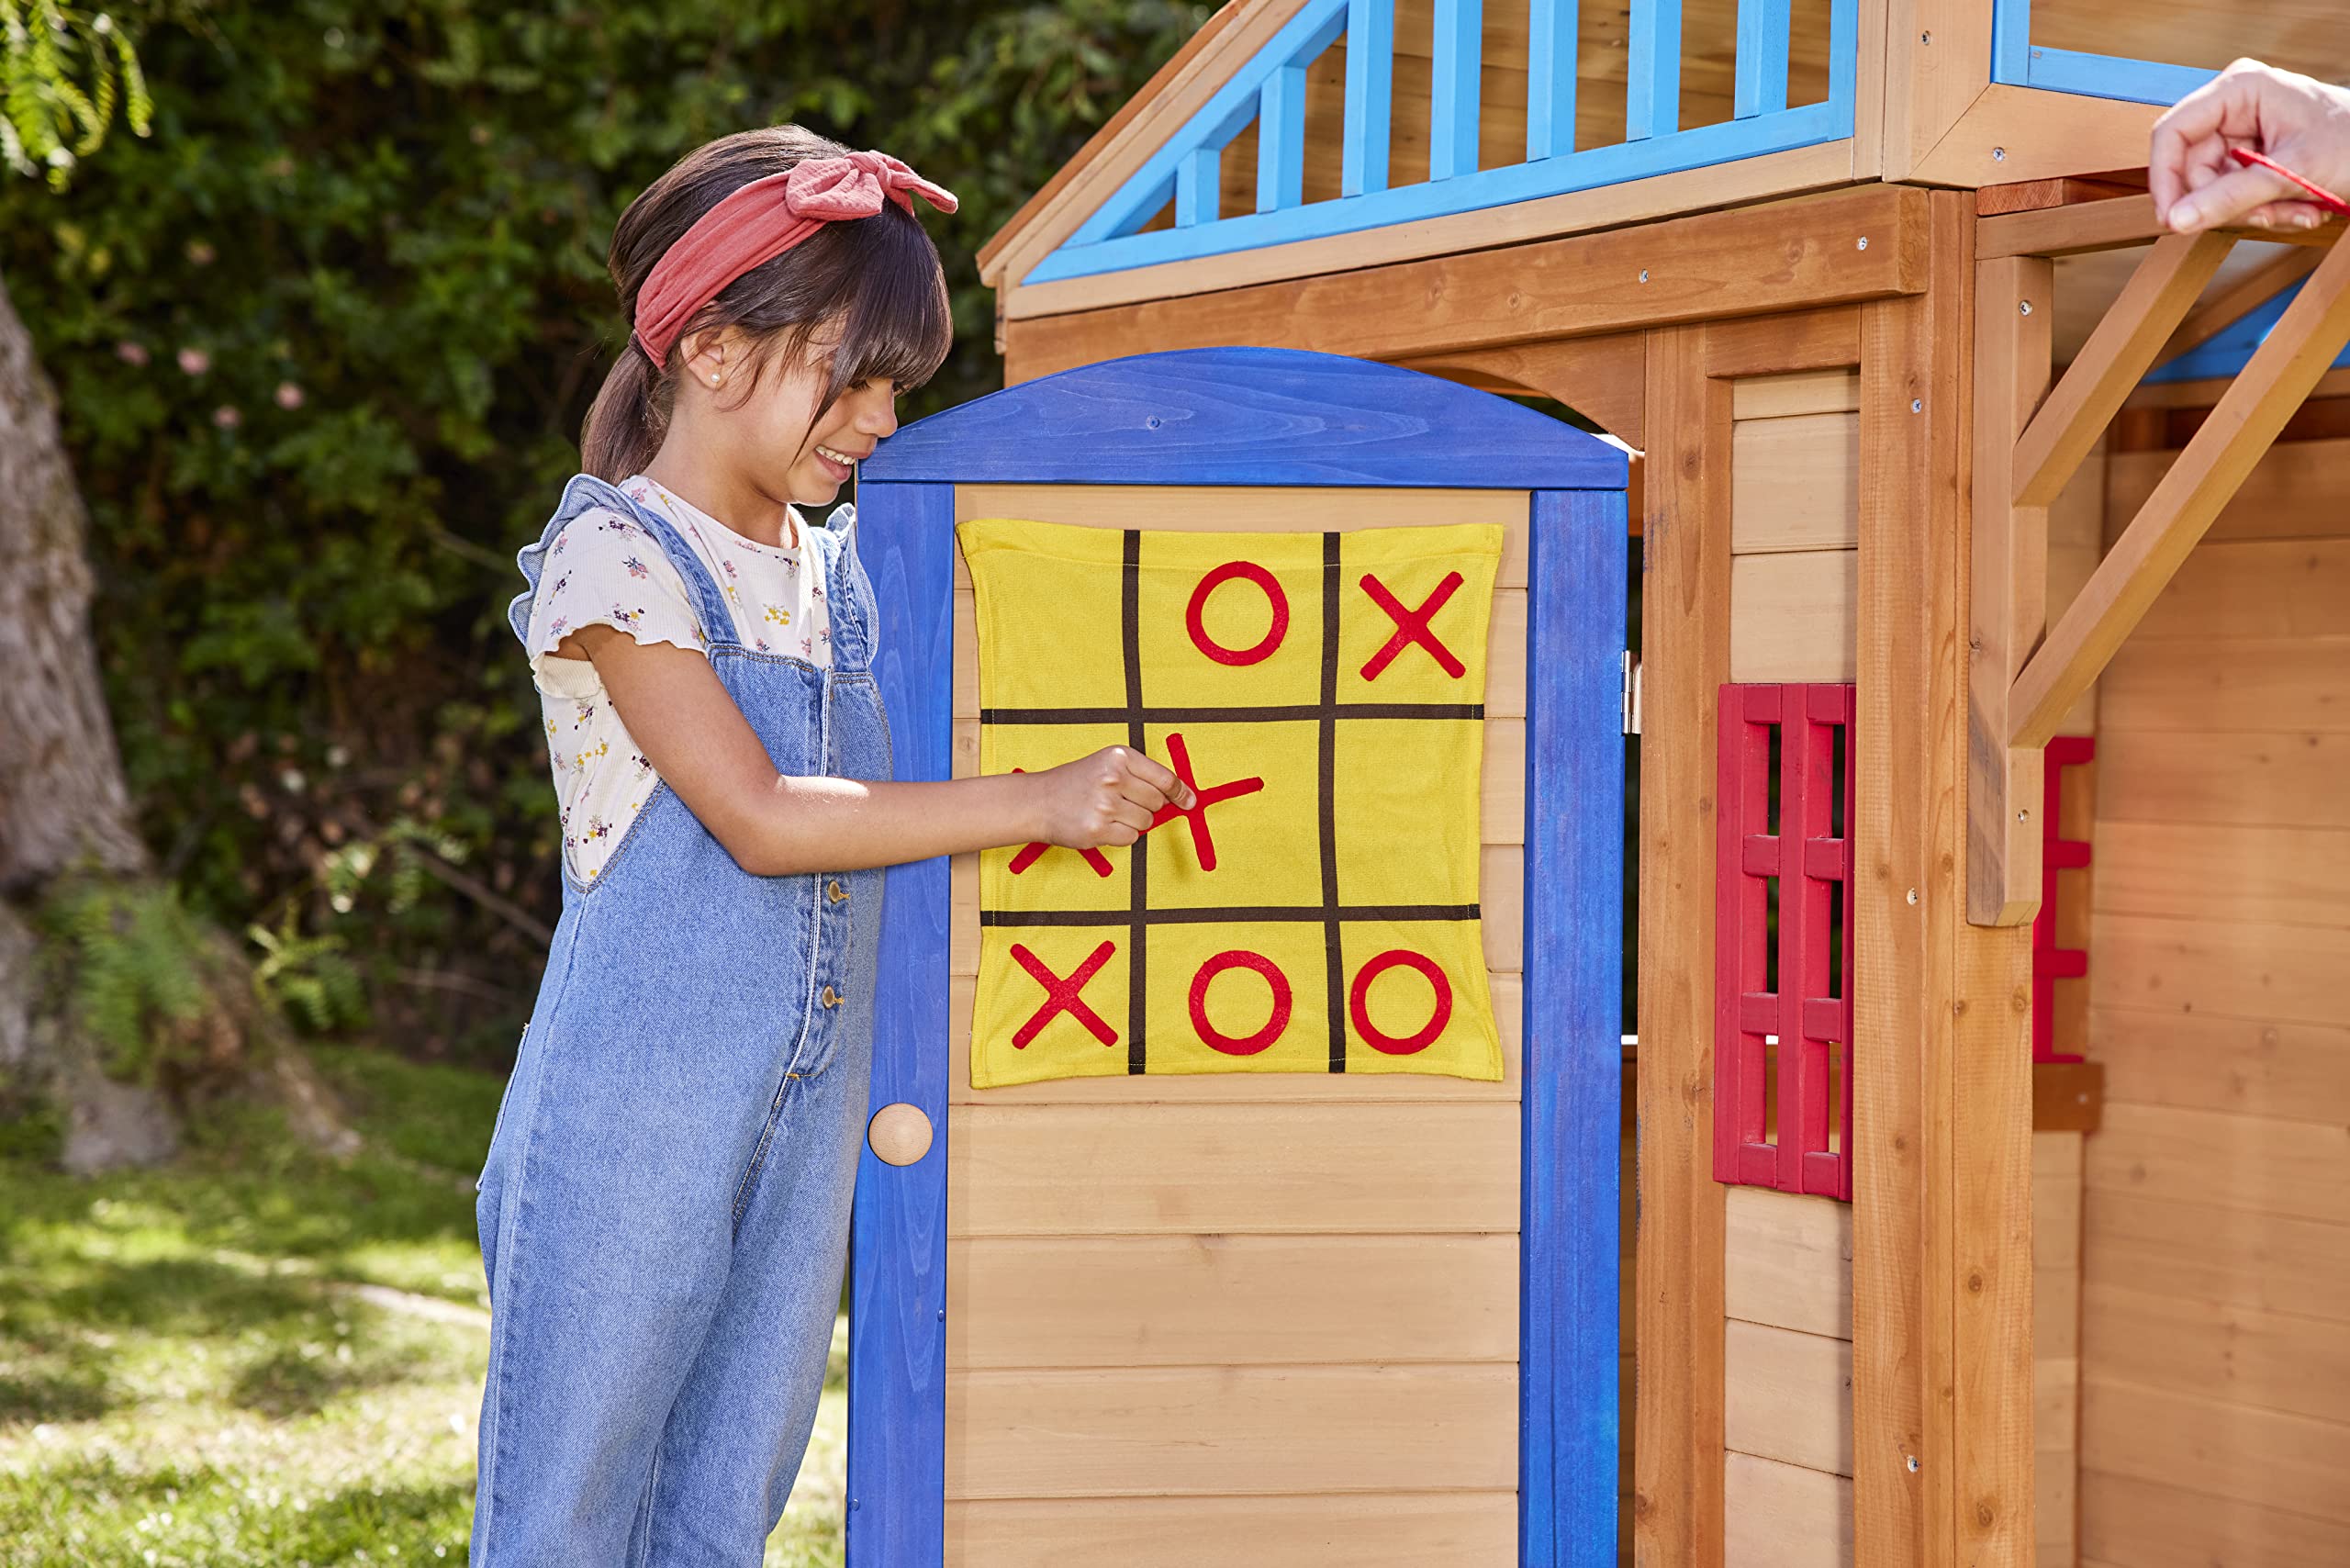 Little Tikes Real Wood Adventures 5-in-1 Game House, Outdoor Wood Game Playhouse for All Kids, Boys and Girls Ages 3+